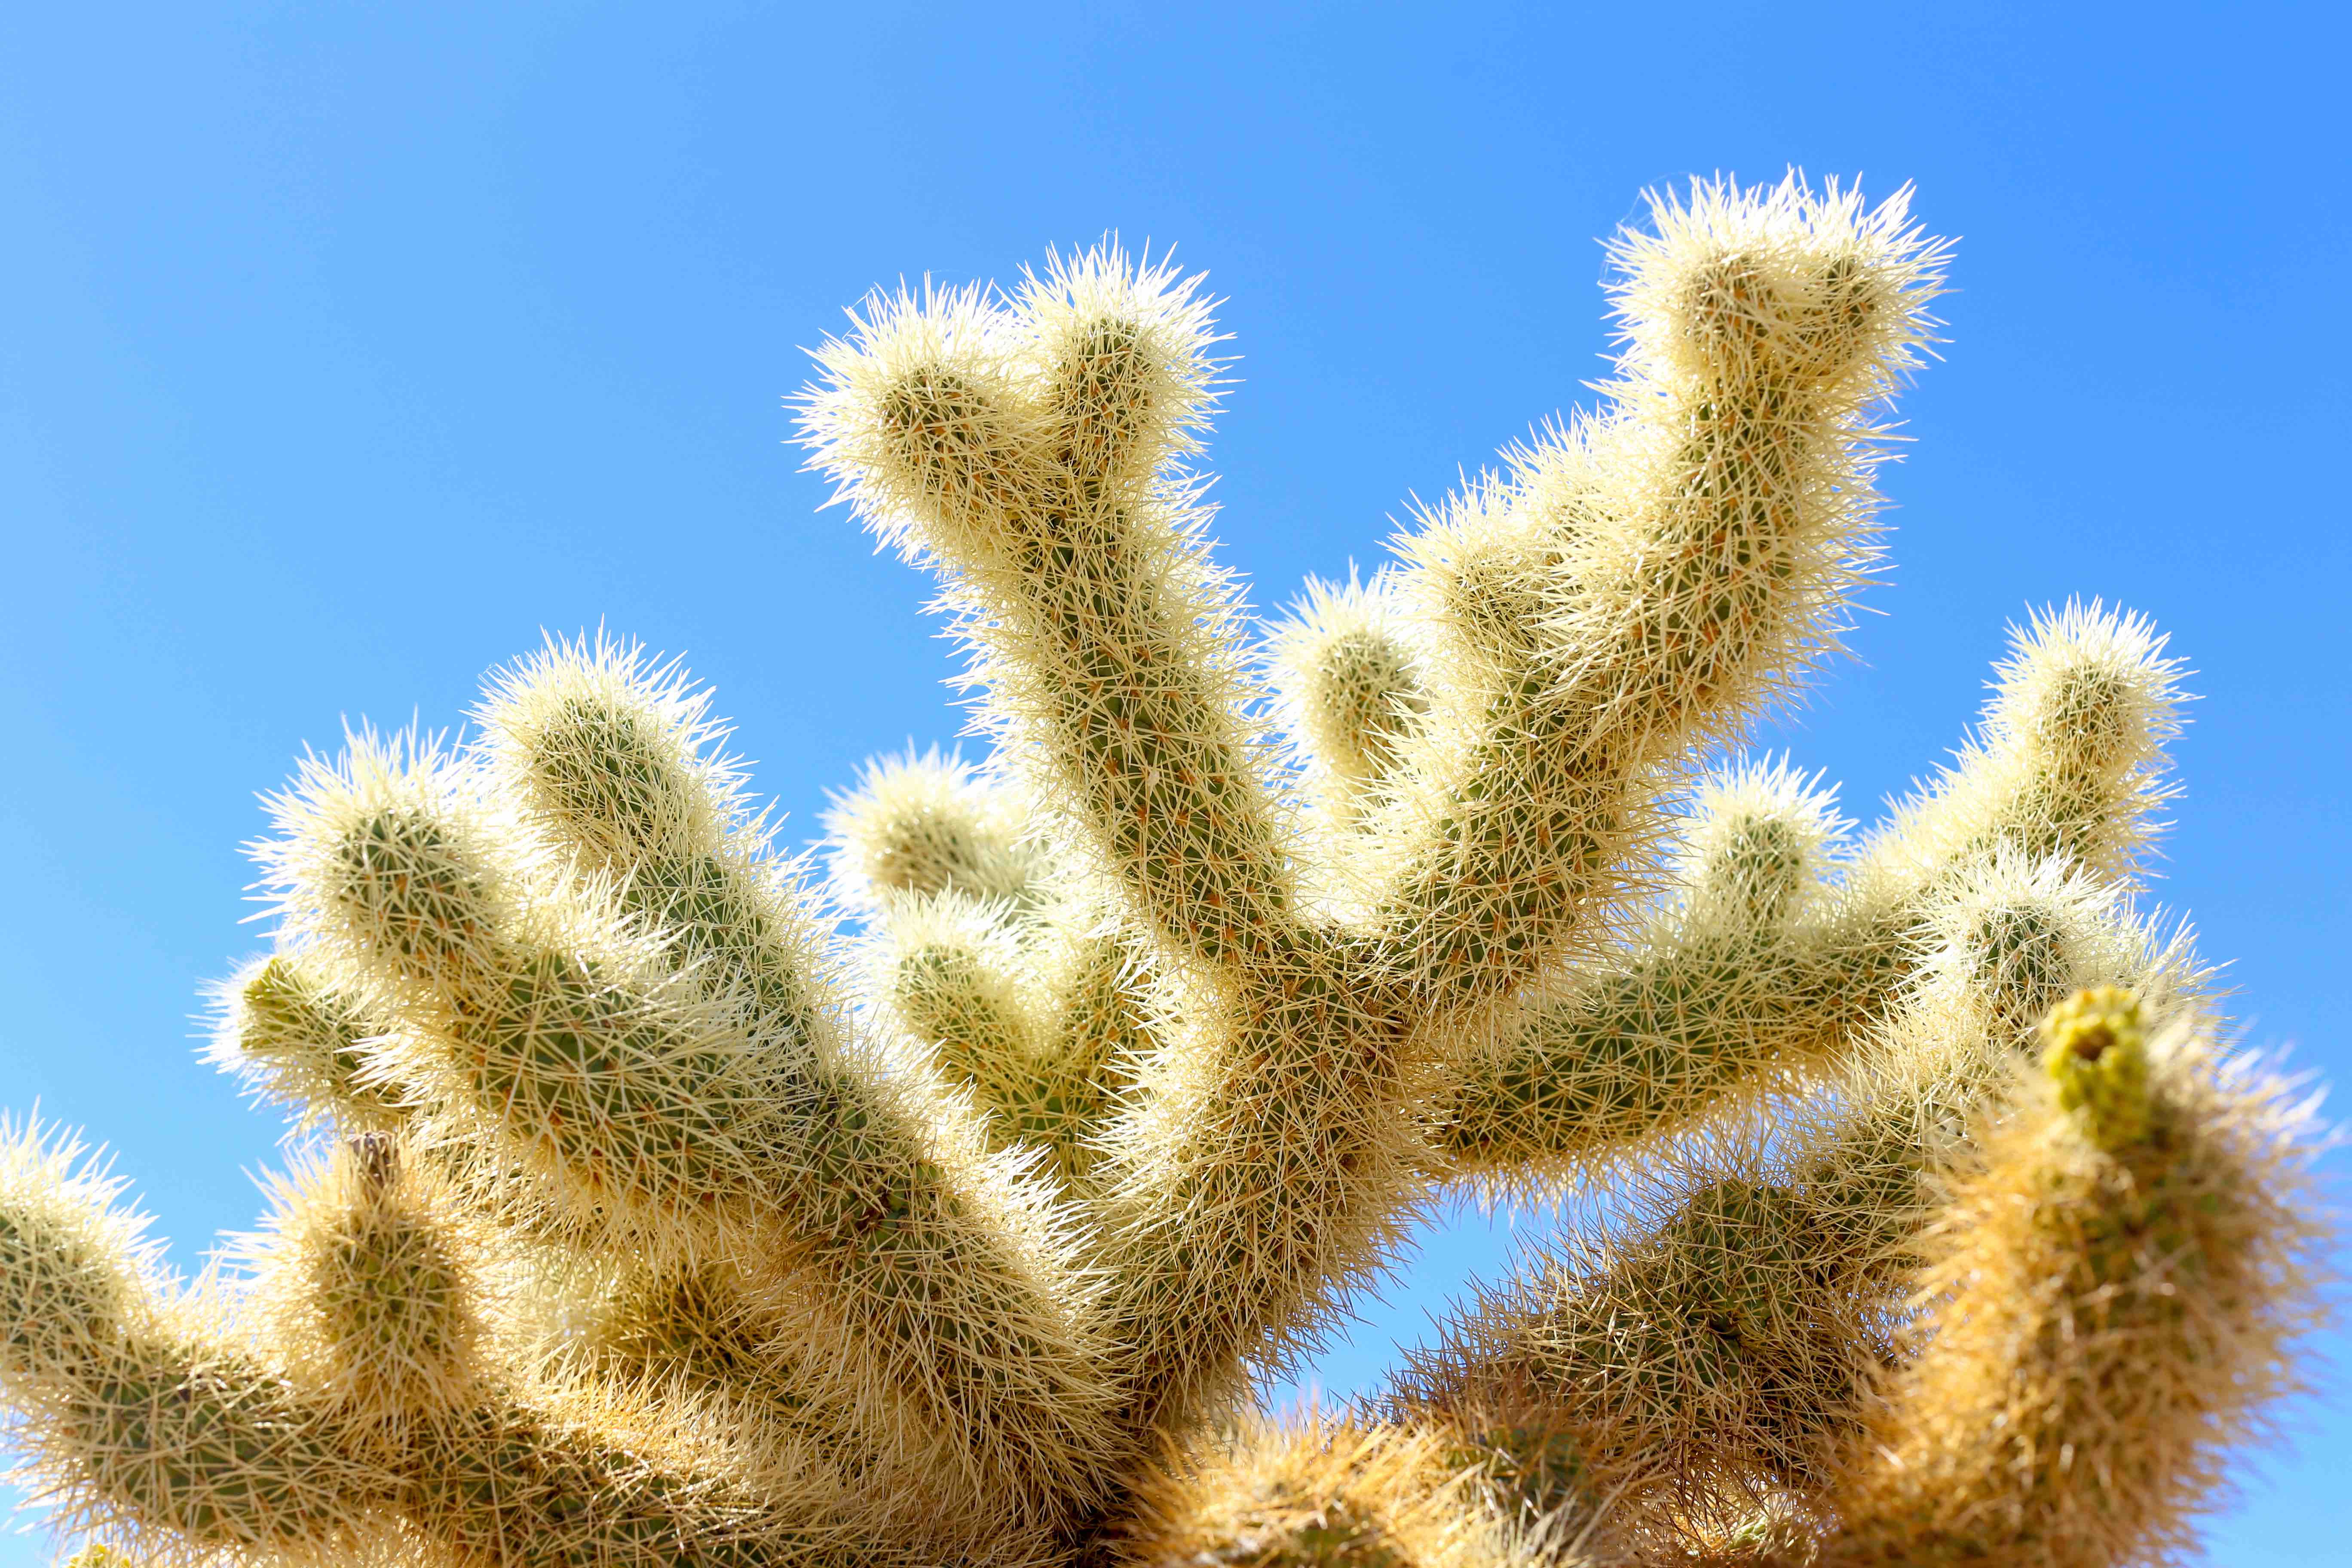 20 Jumping Cholla Facts That May Bite You   Facts.net